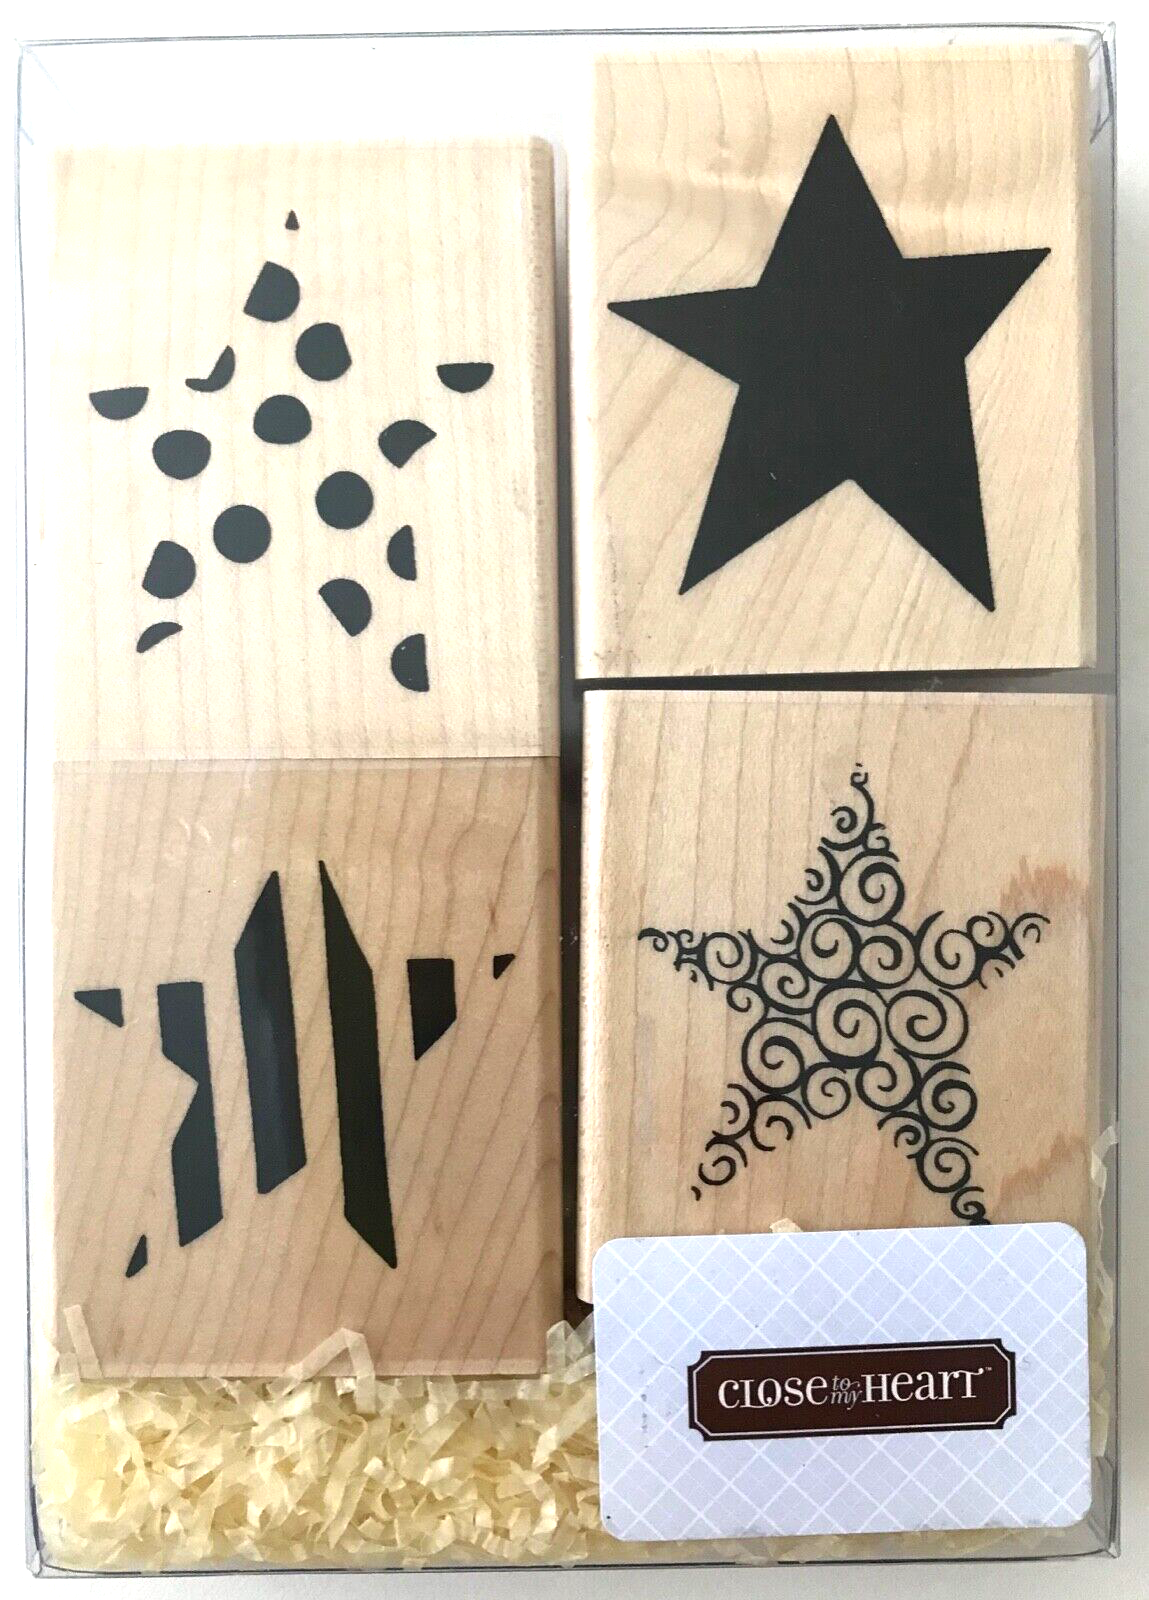 "Star Impressions" 4 Rubber Stamps 2-Part Close To My Heart S737 New NRFB - $6.89